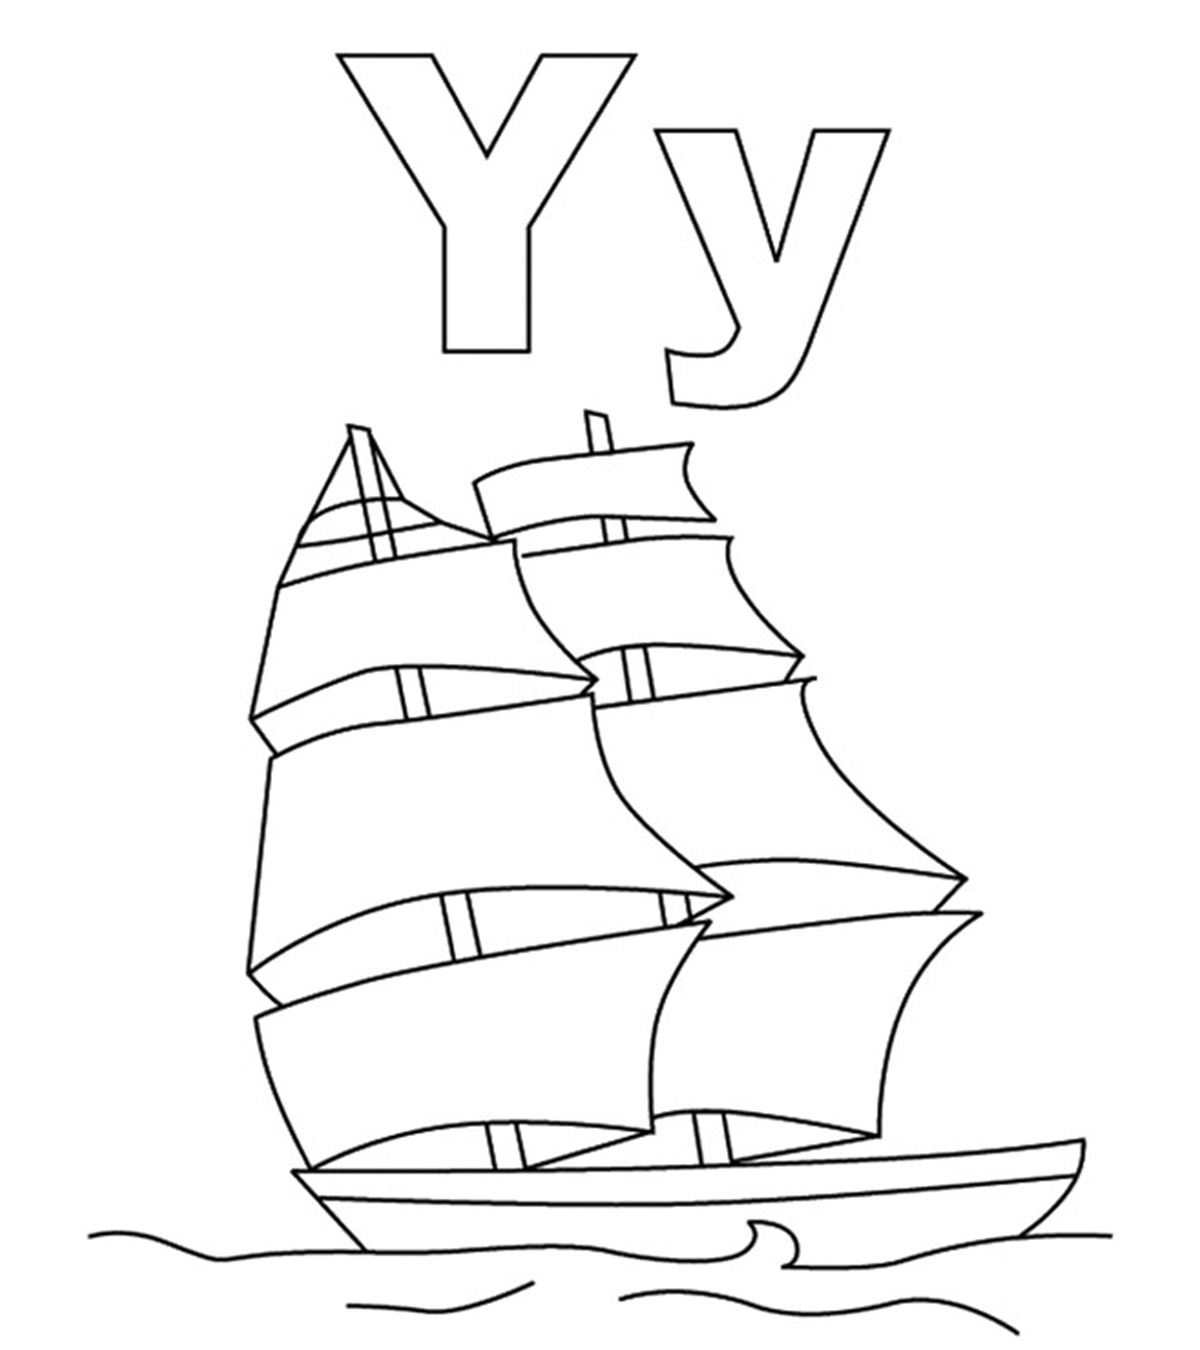 Top 10 Letter ‘Y’ Coloring Pages Your Toddler Will Love To Learn & Color_image